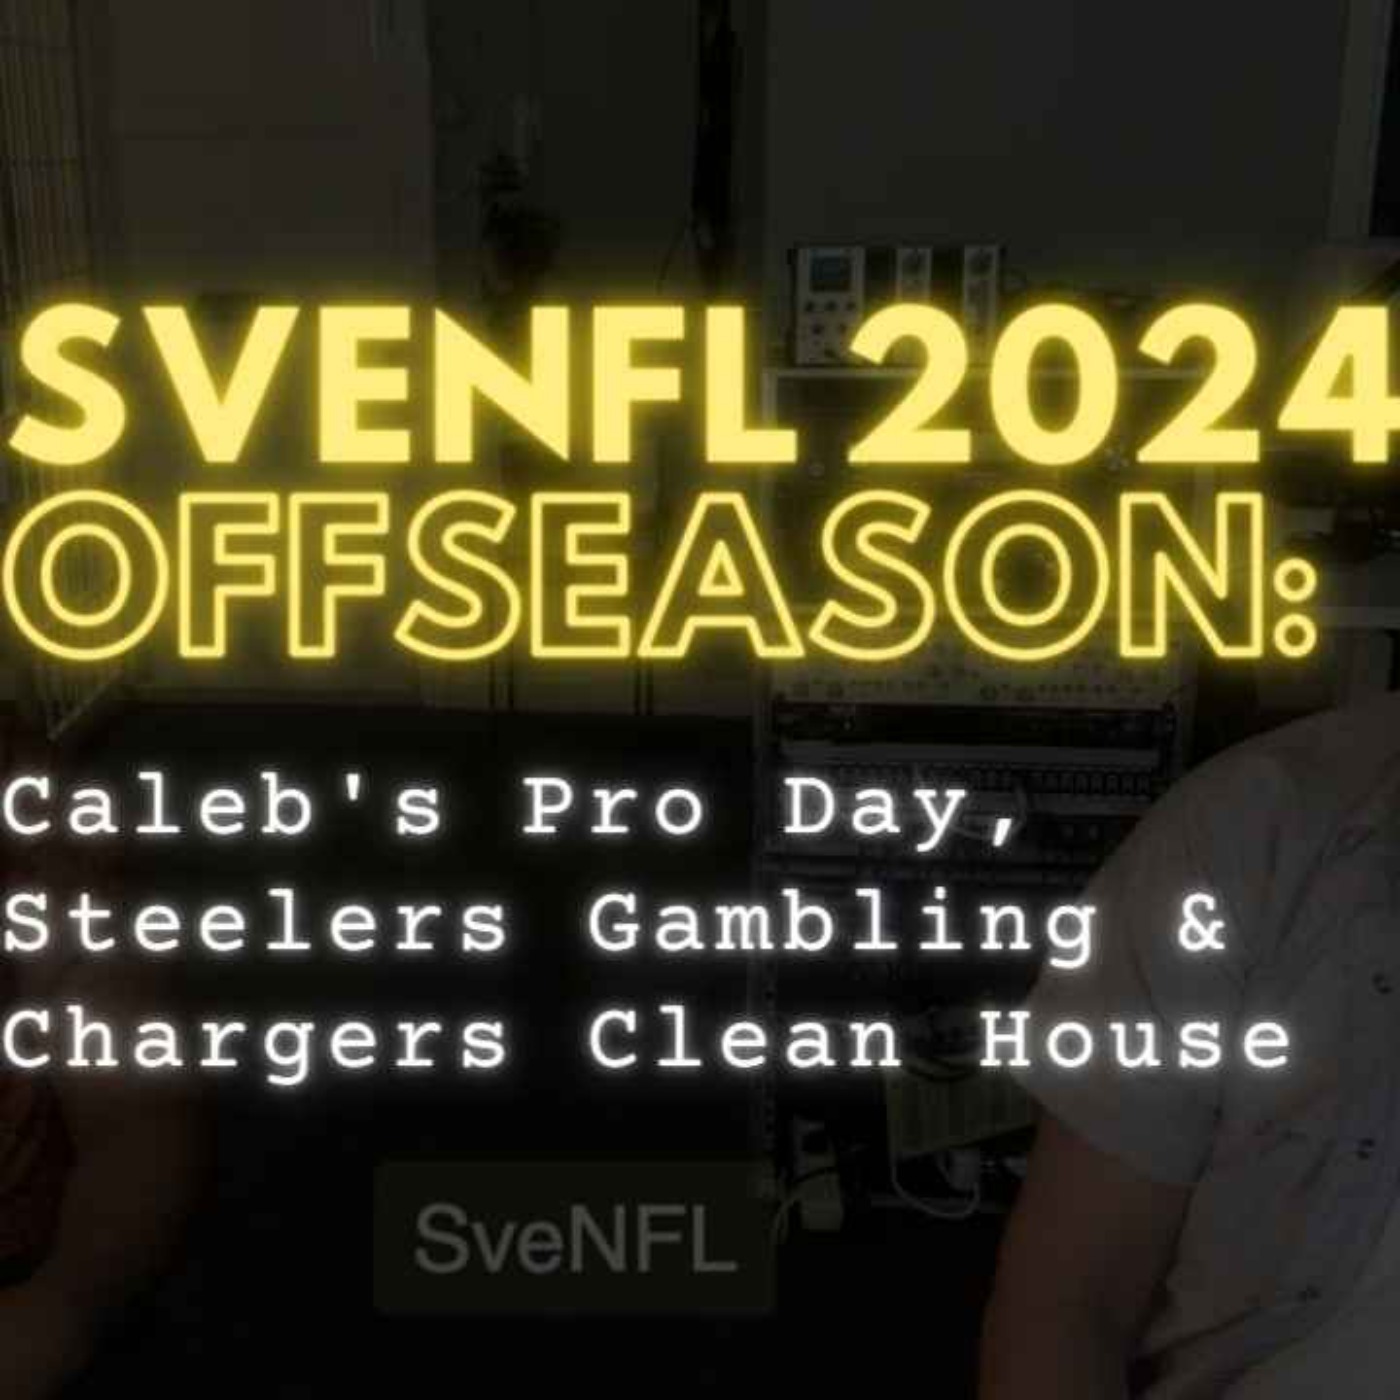 SveNFL 2024 Offseason: Caleb’s Pro Day, Steelers Gambling & Chargers Clean House